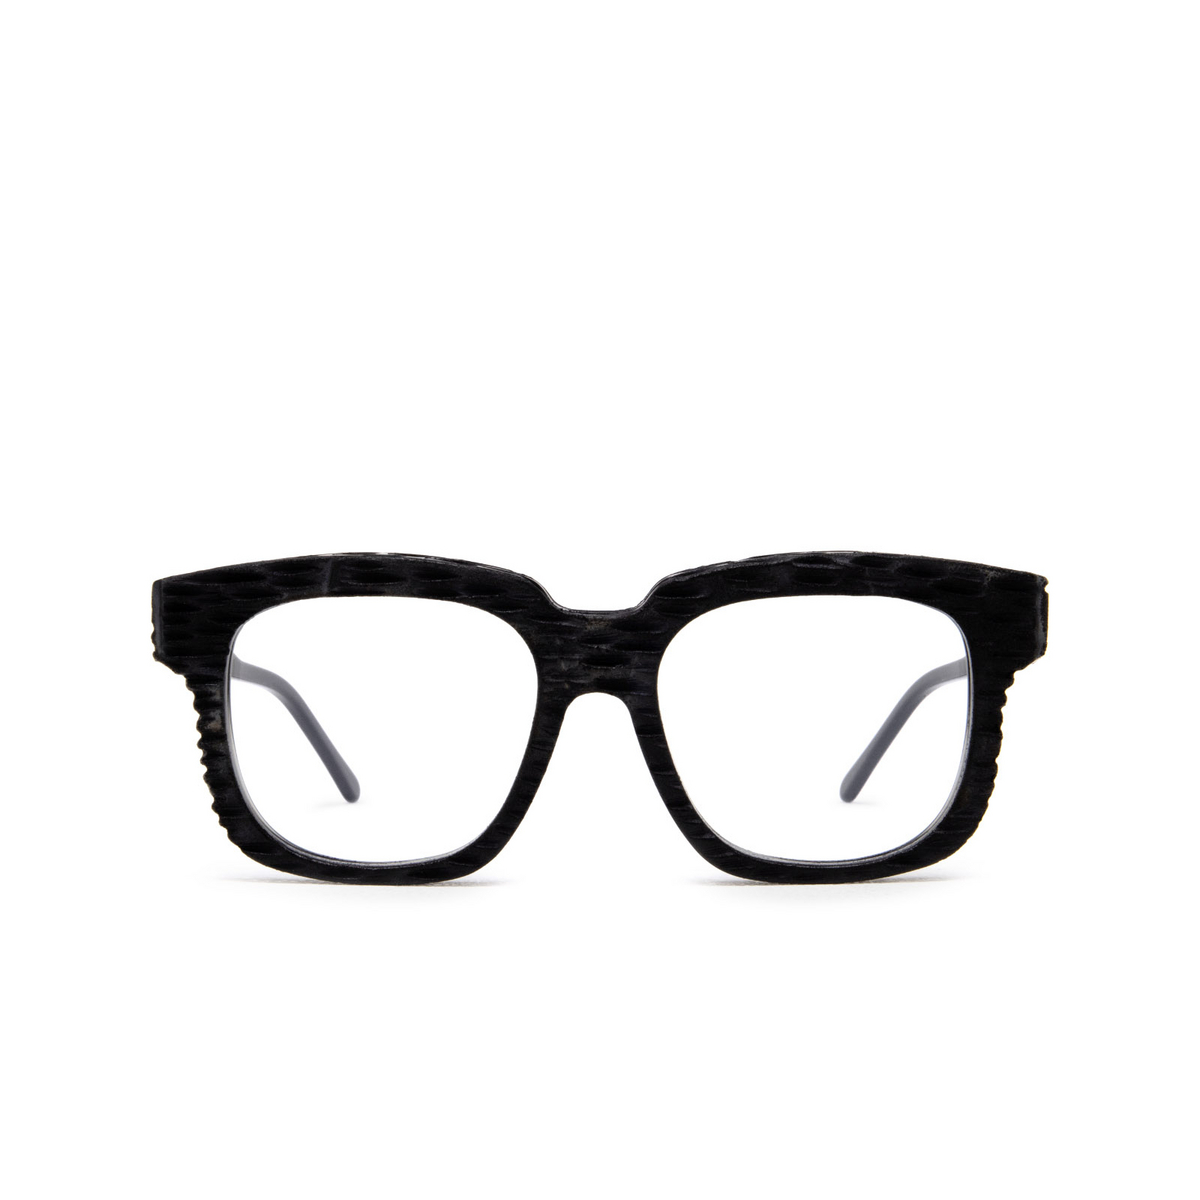 Kuboraum K25 Eyeglasses BS SQ Sequence - front view